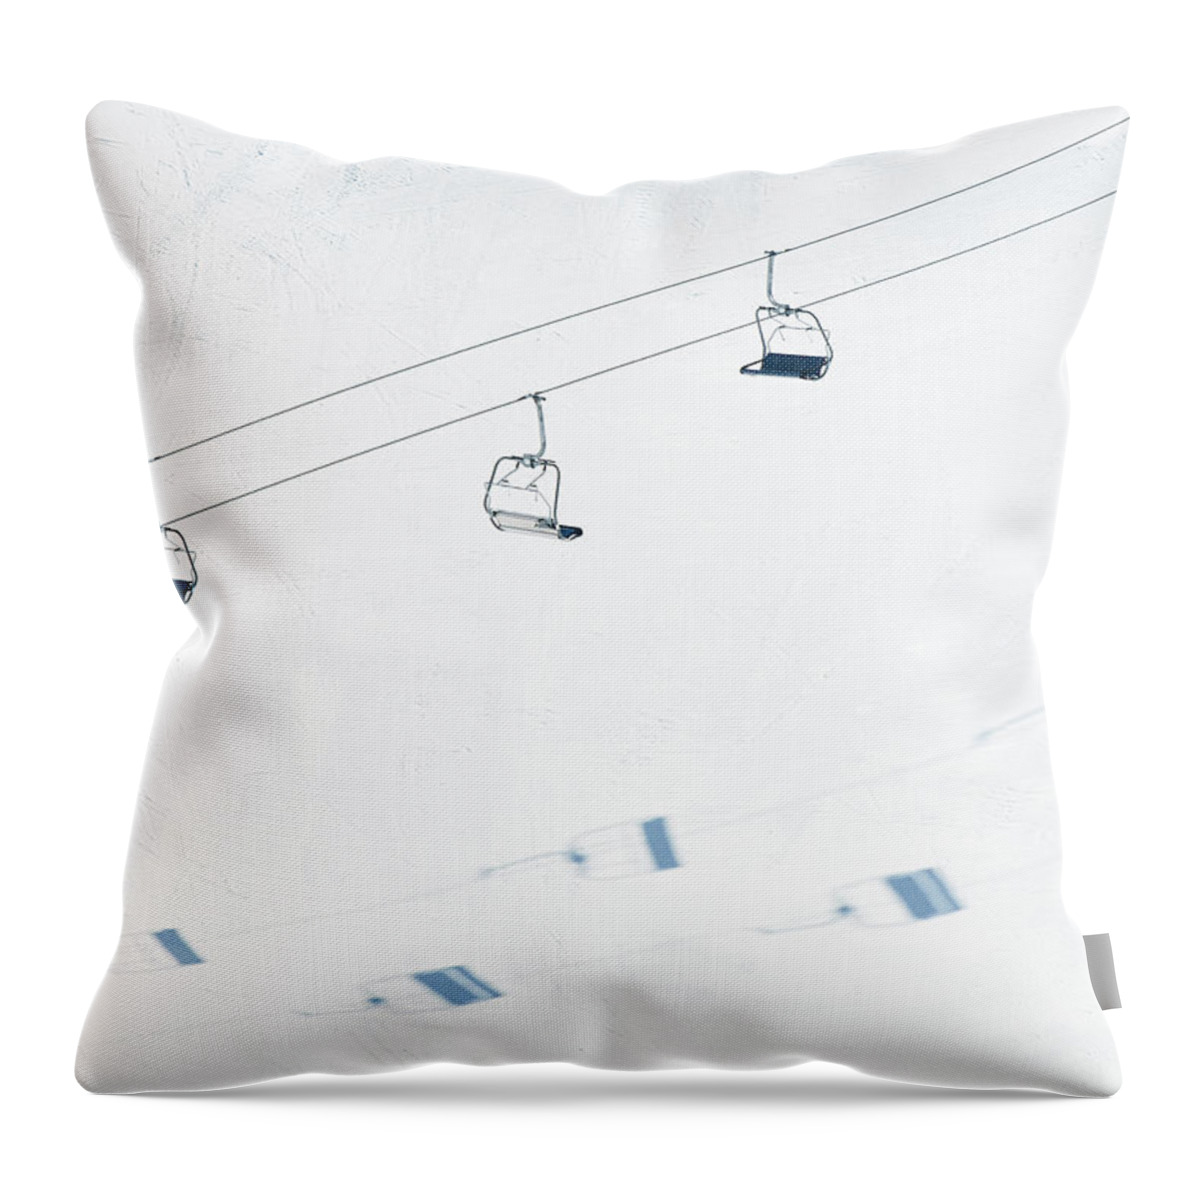 Shadow Throw Pillow featuring the photograph Chairlift And Ski Piste by Georgeclerk